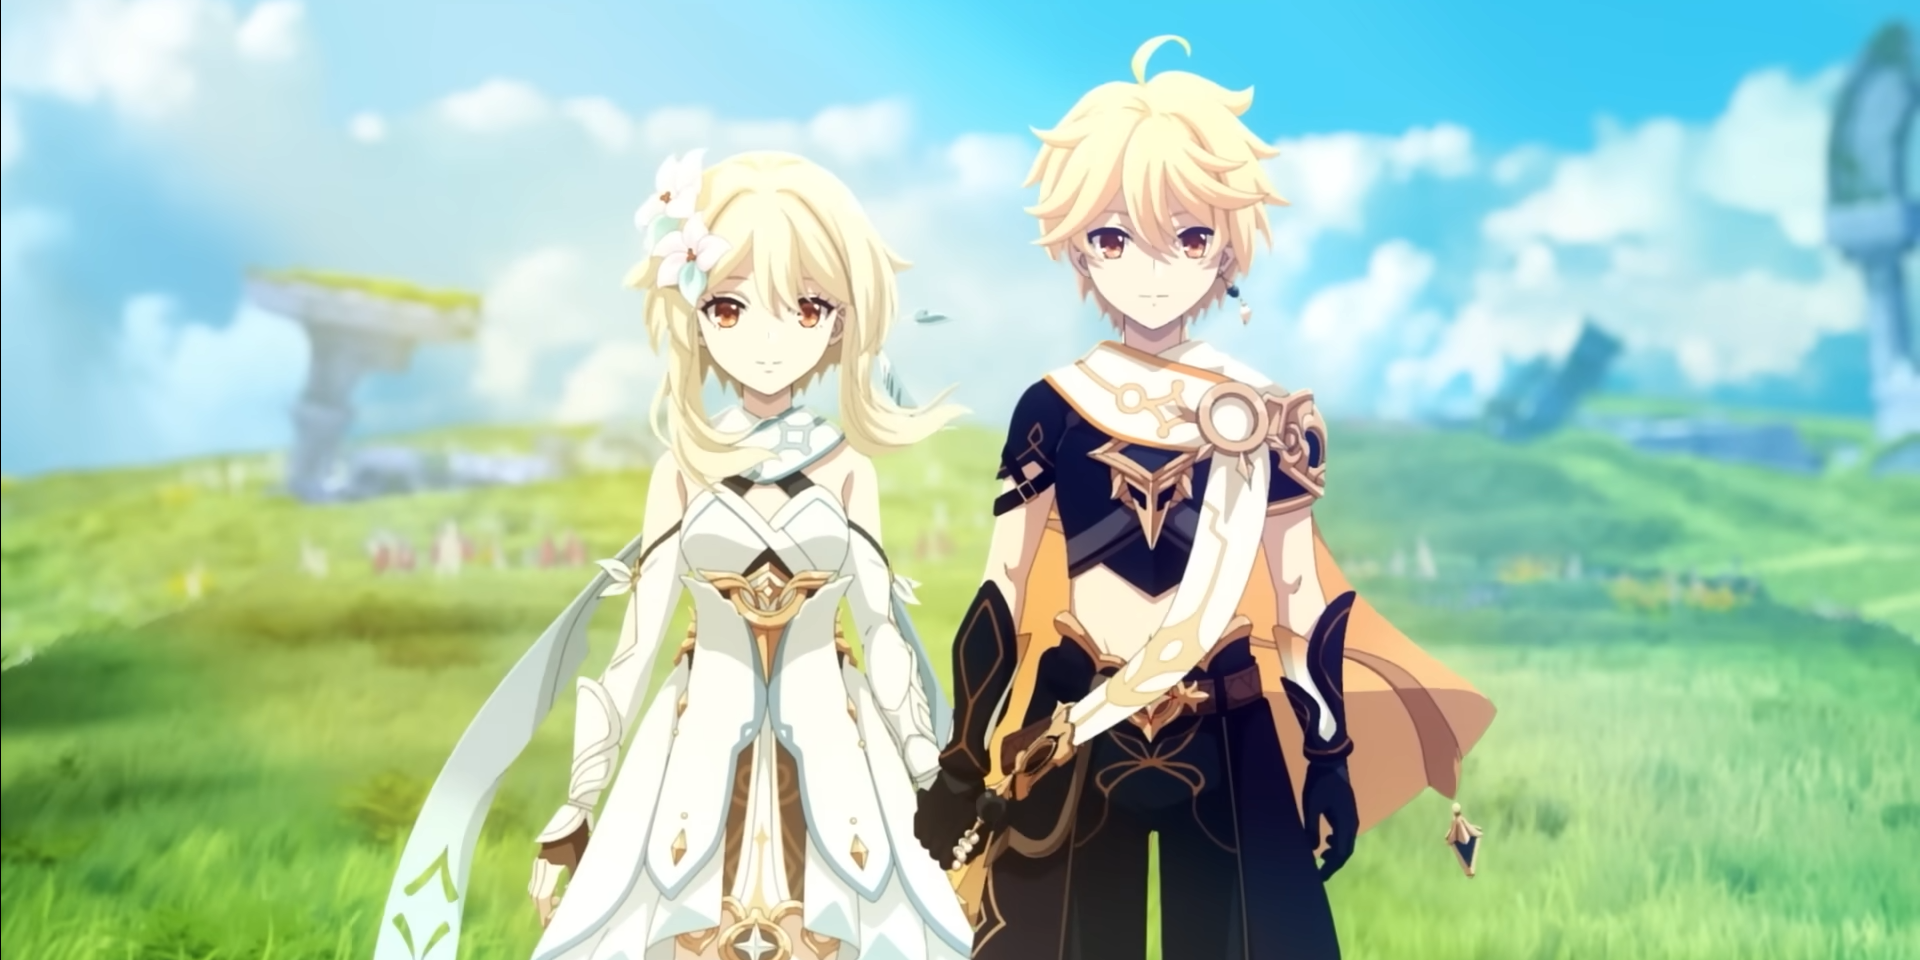 Aether and Lumine hold hands while standing in a windy green field, while looking towards the view. Short animation produced by ufotable in collaboration with HoYoverse.